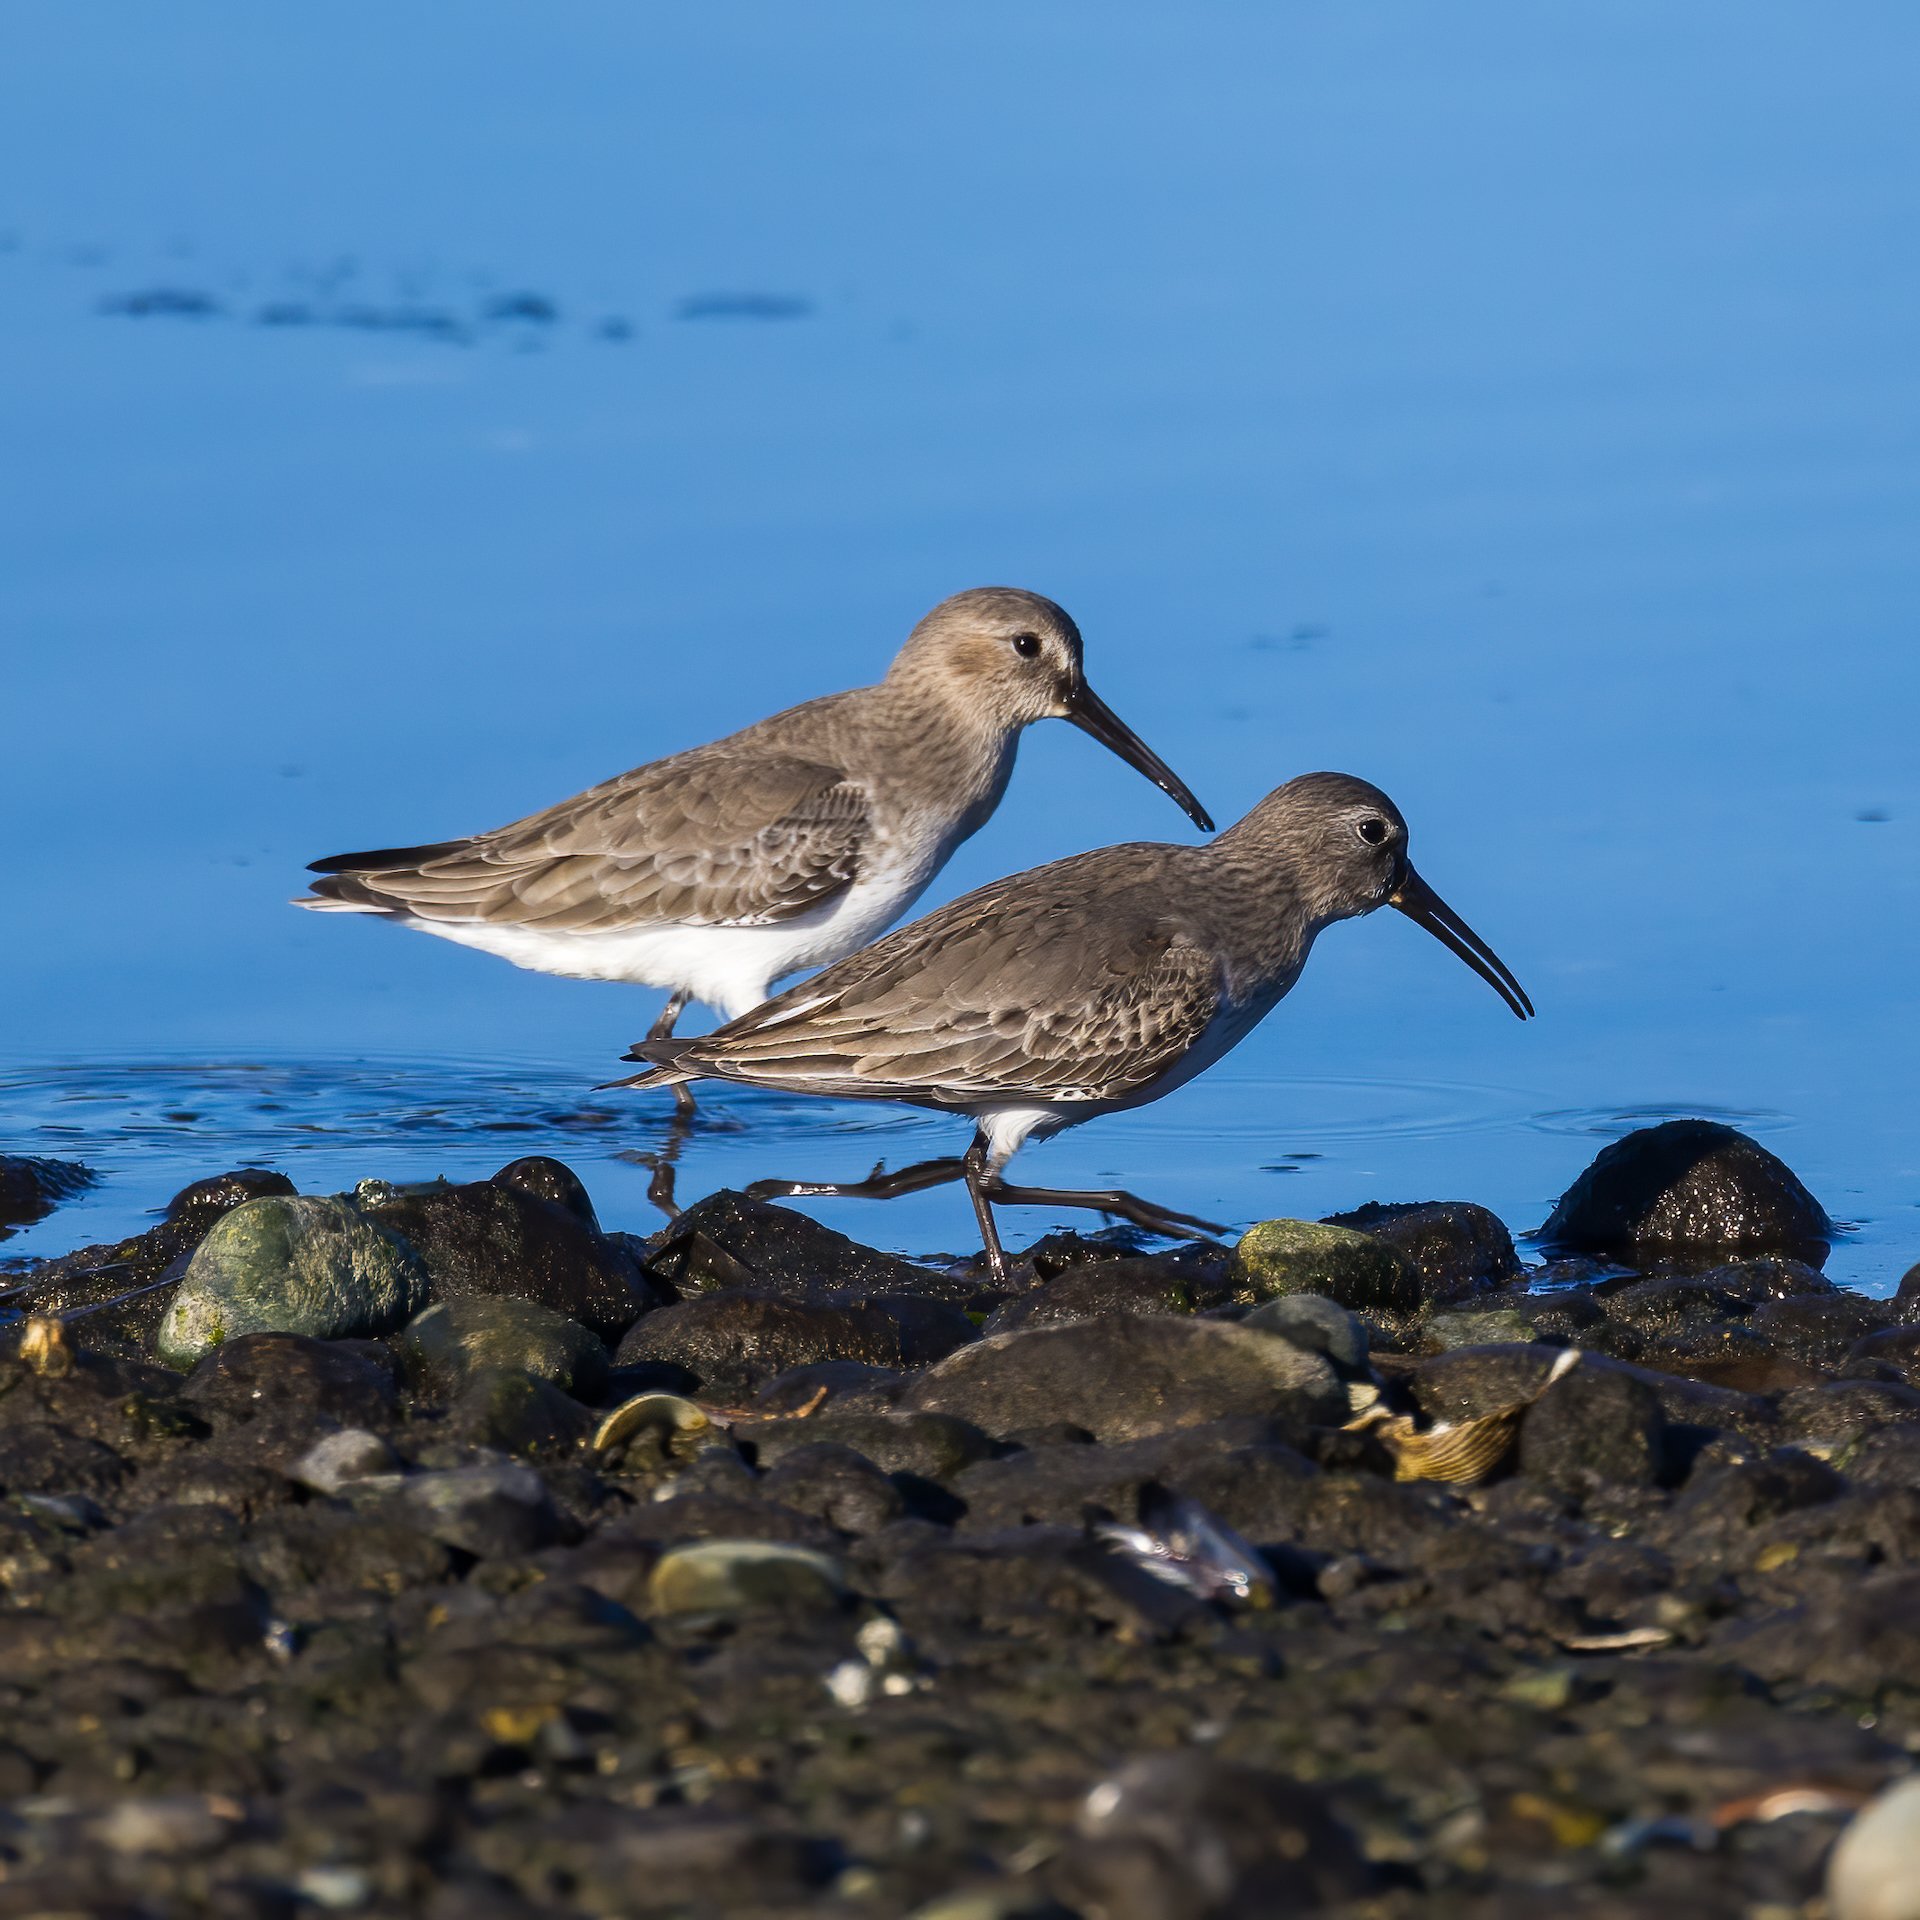  A pair of Dunlins.  